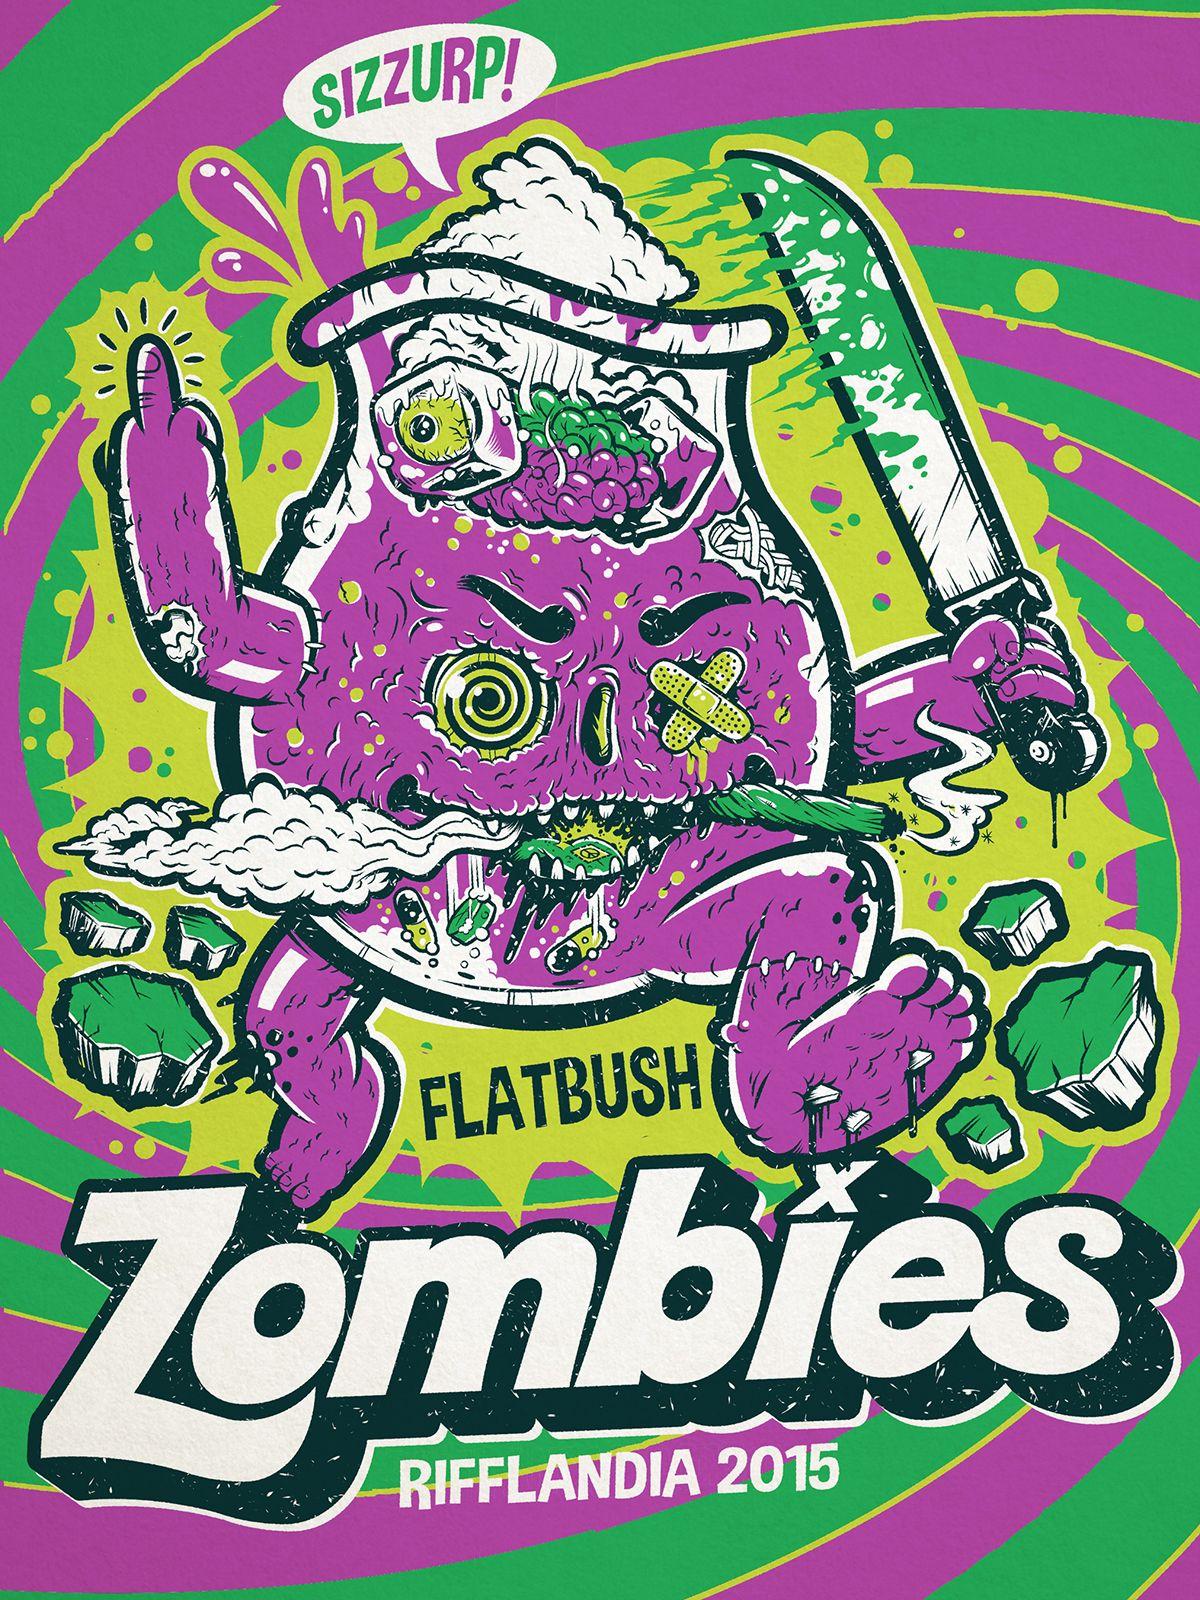 I made this poster for the Flatbush Zombies event at Rifflandia, a